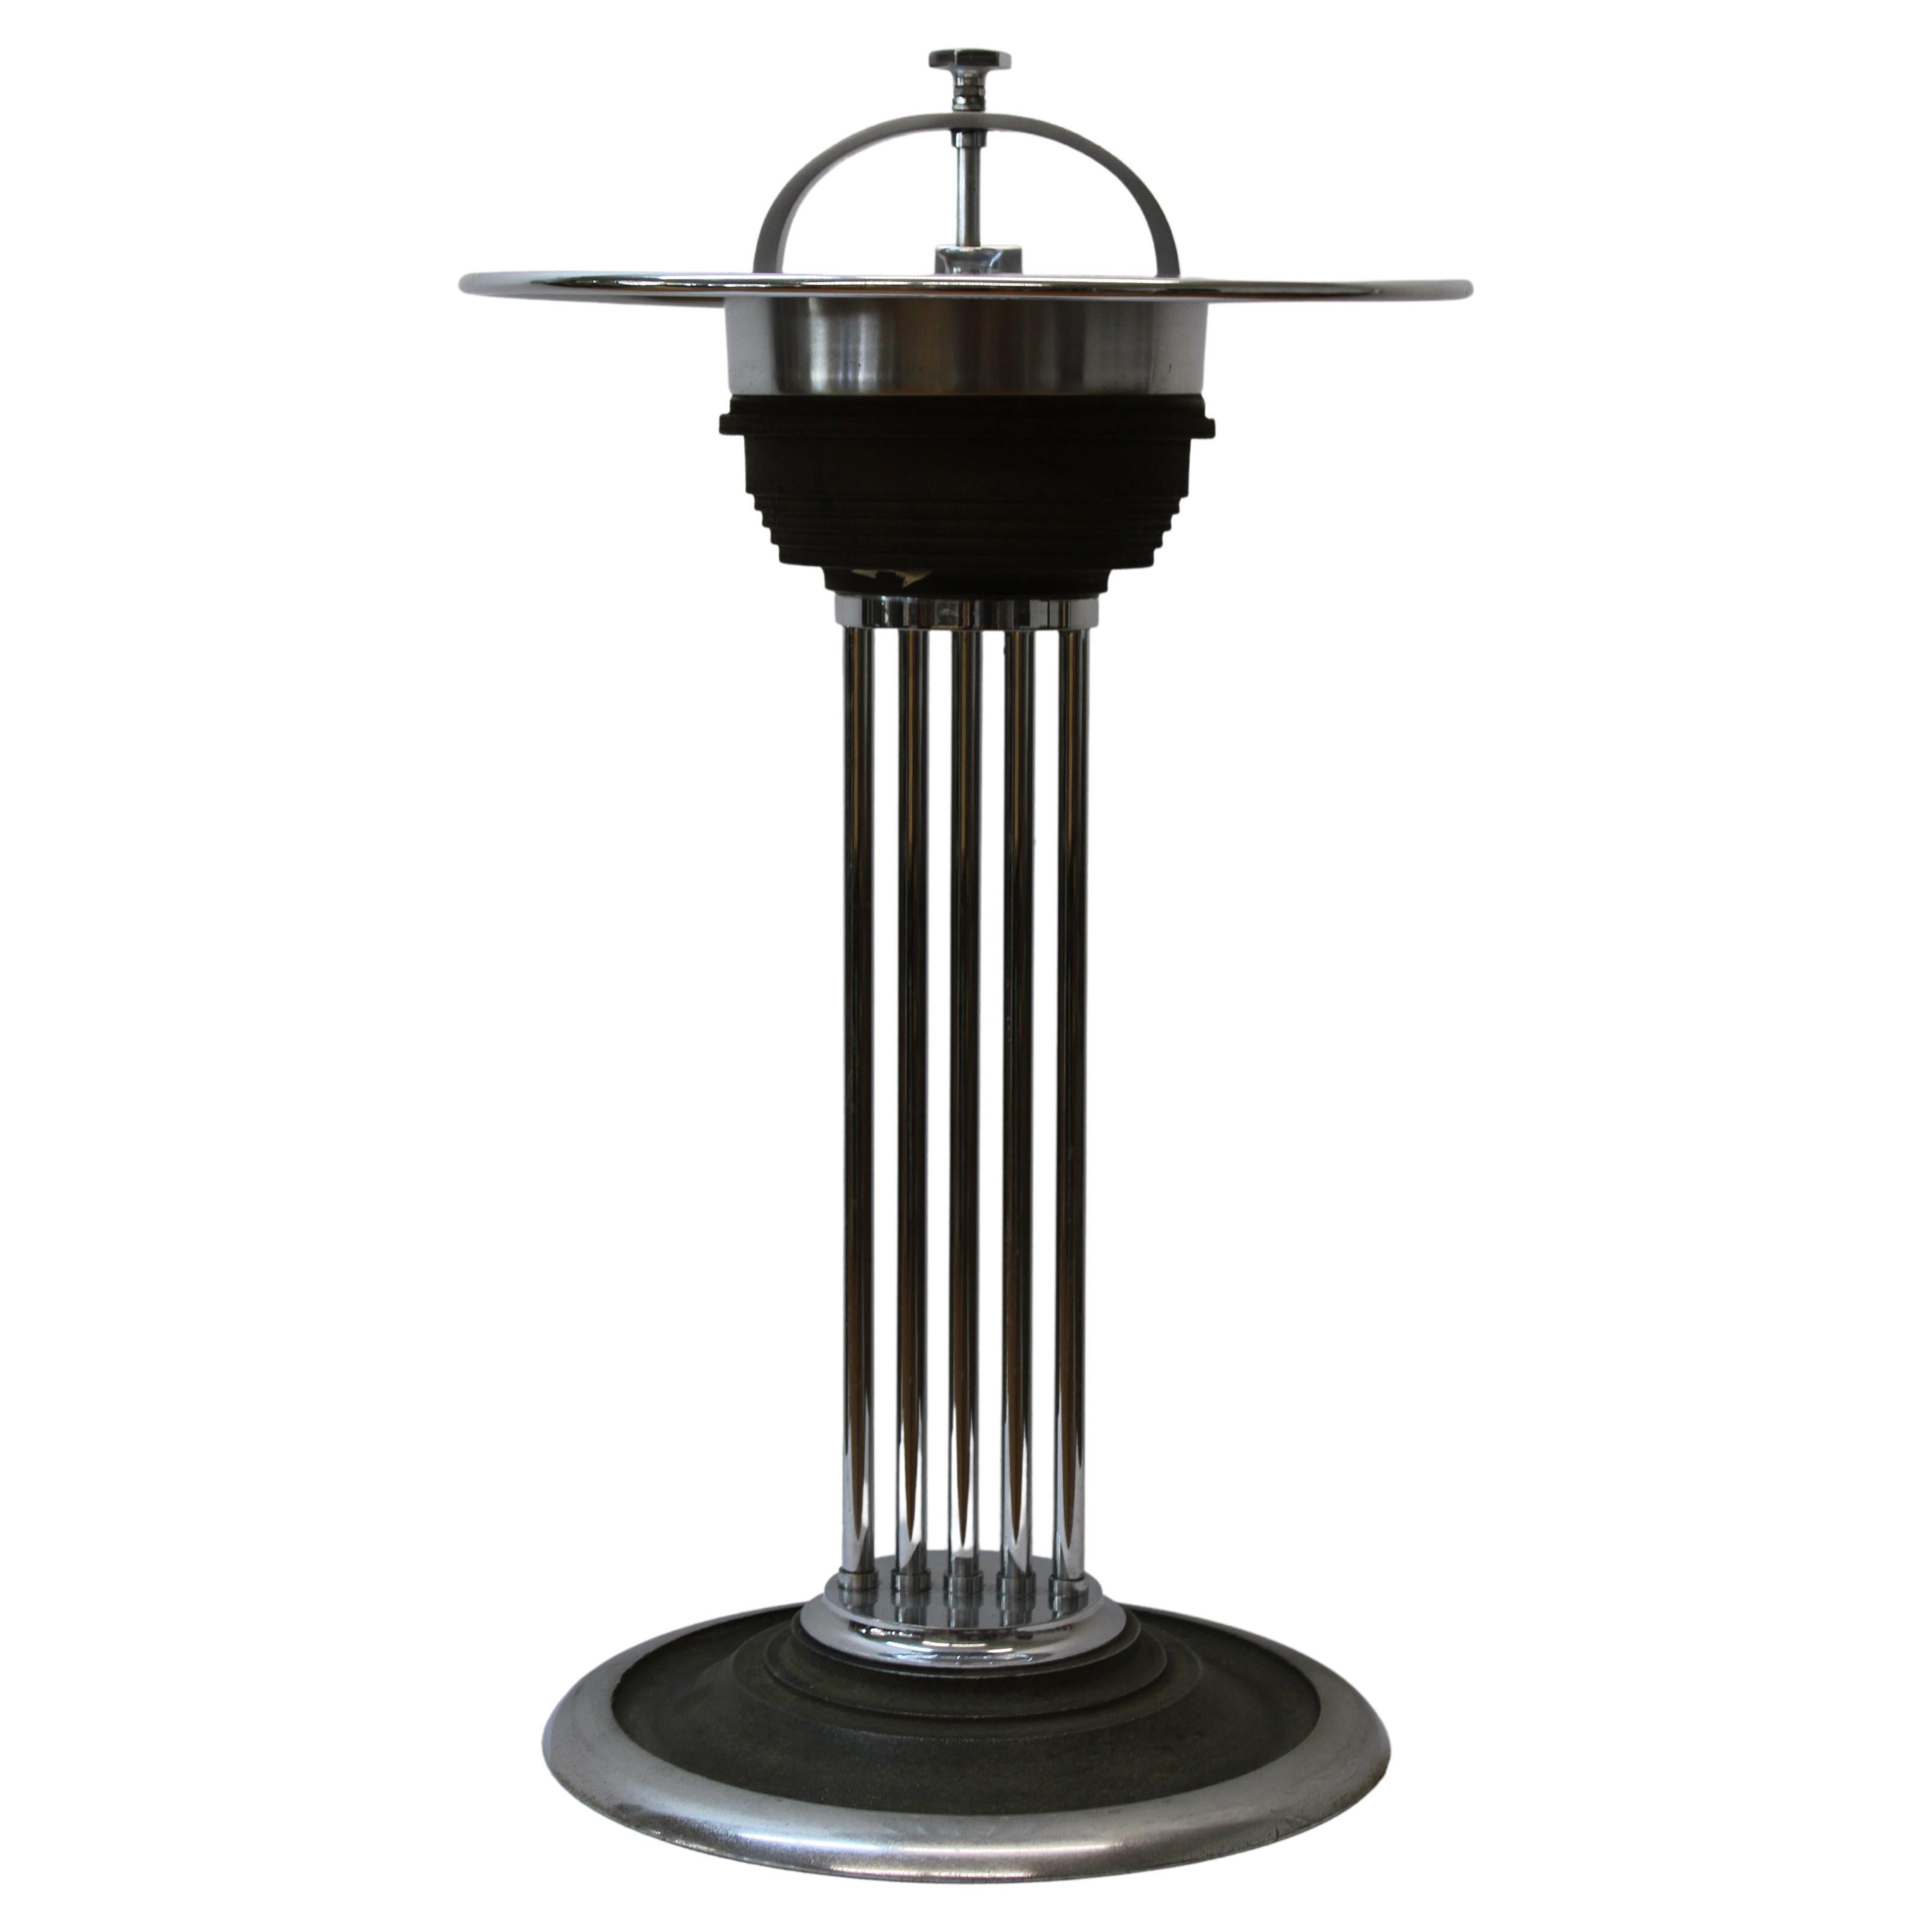 Art Deco Ashtray / Cocktail Smoker Stand Designed By W.J Campbell